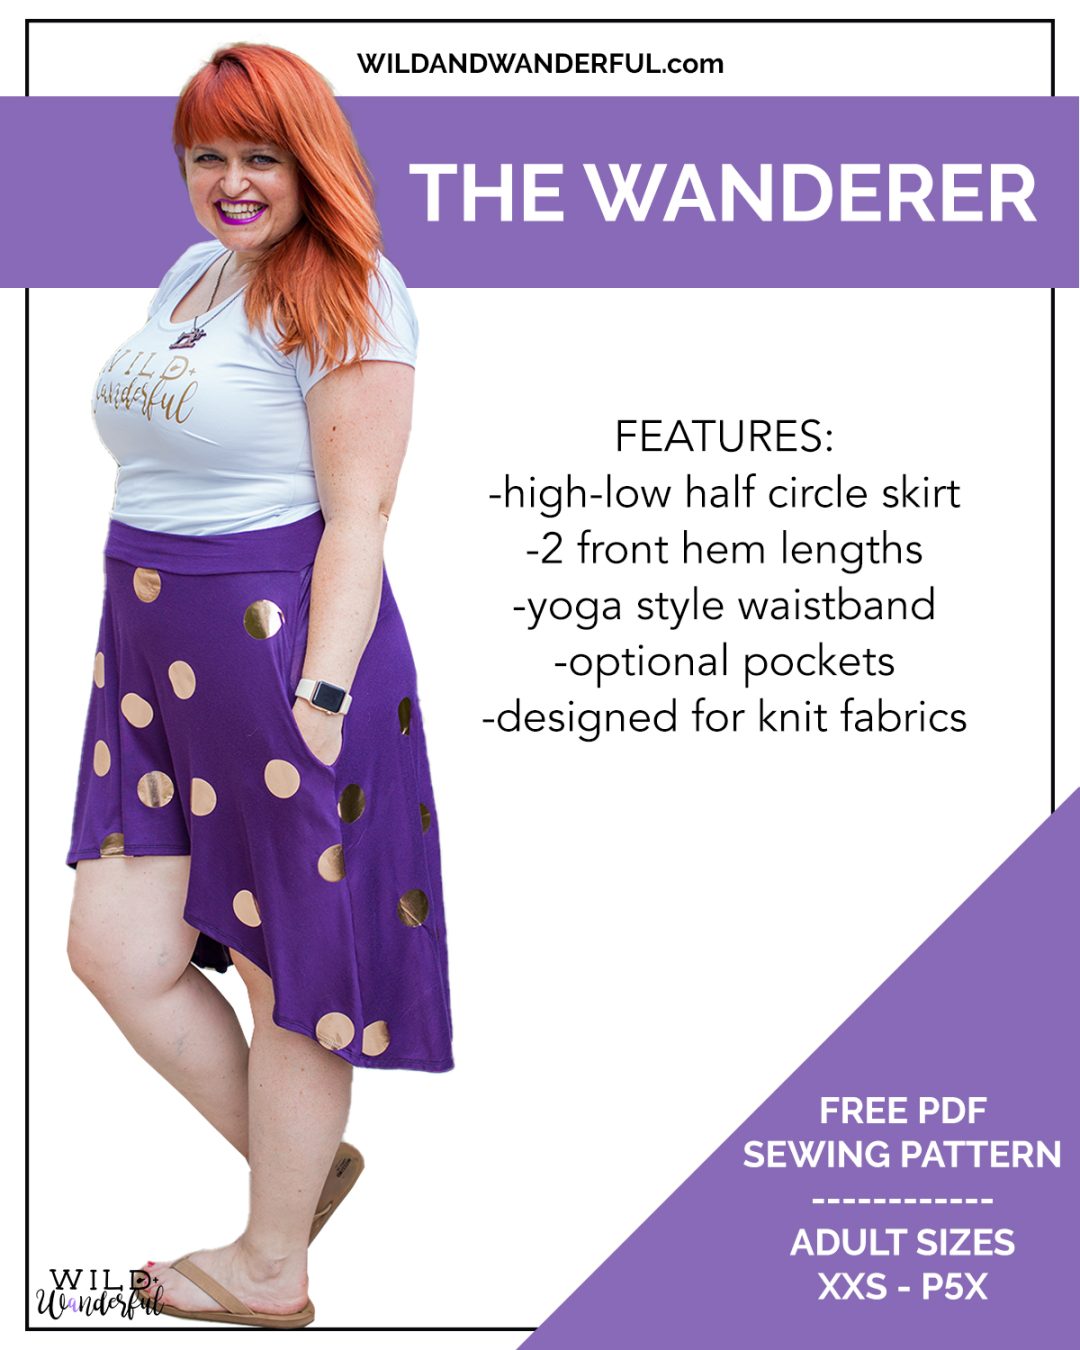 The Wanderer Skirt | A Free PDF Sewing Pattern from Wild+Wanderful!